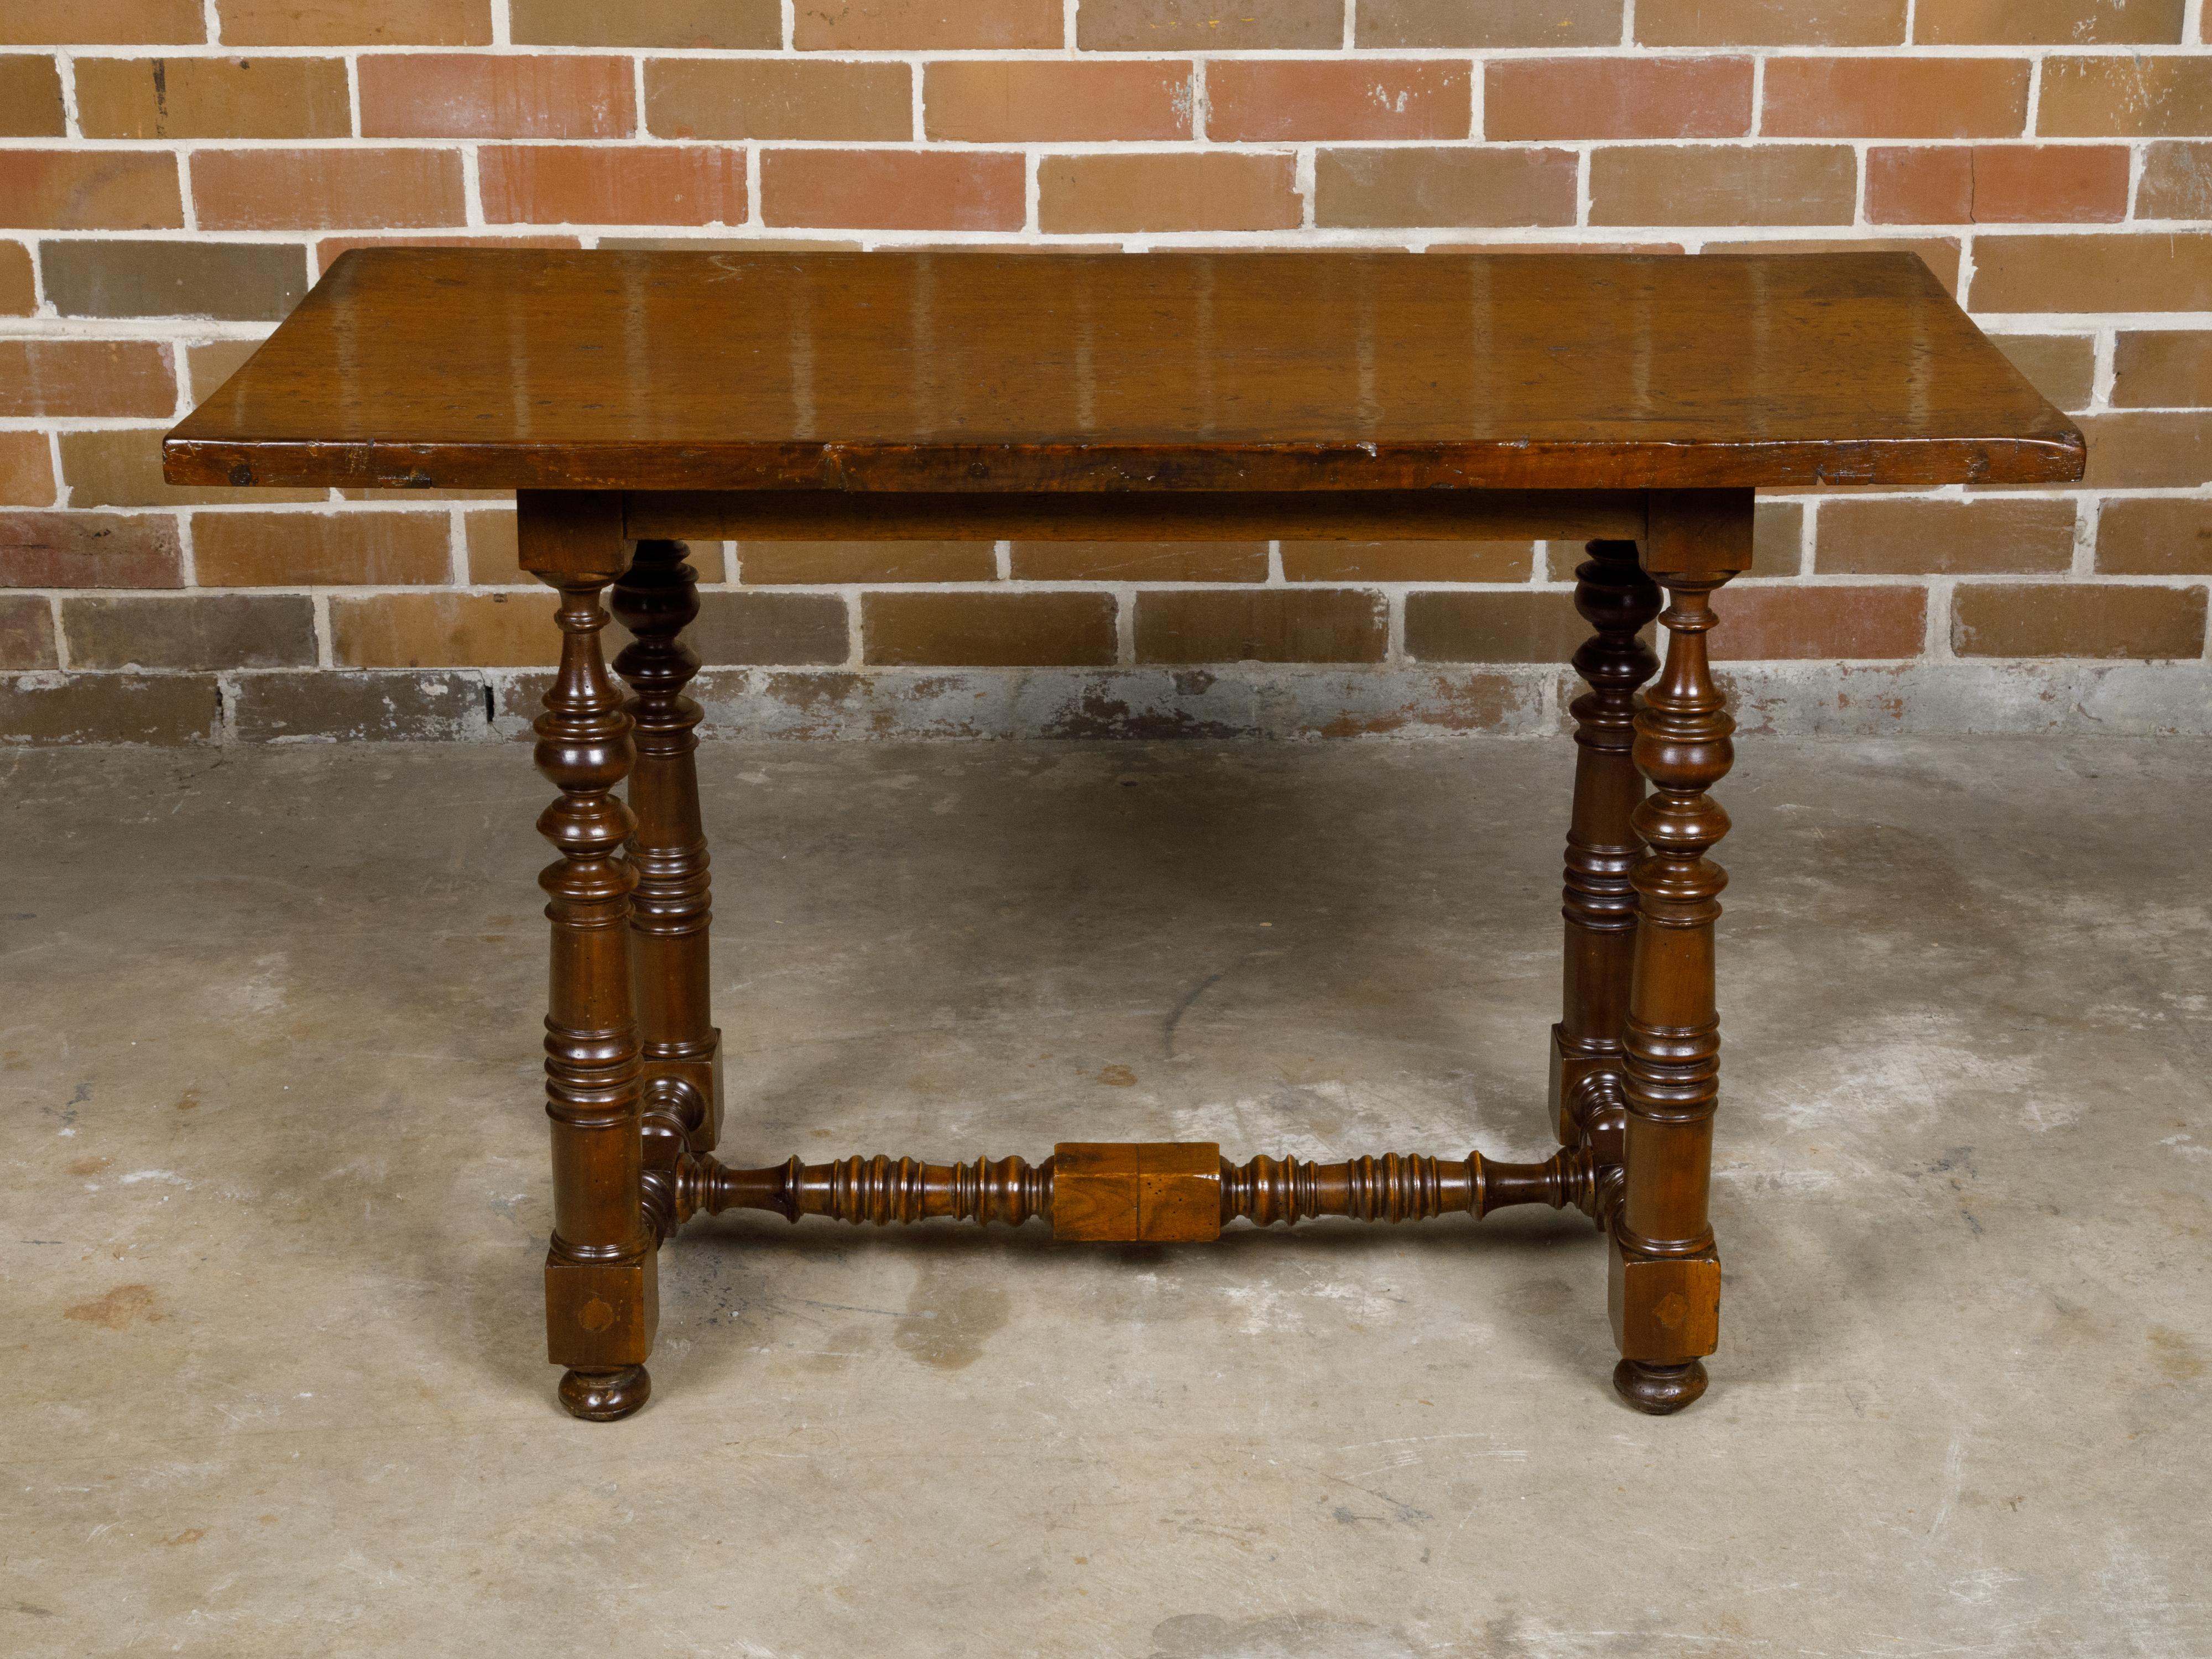 Italian 1800s Walnut Baroque Style Spool Table with H-Form Cross Stretcher For Sale 5